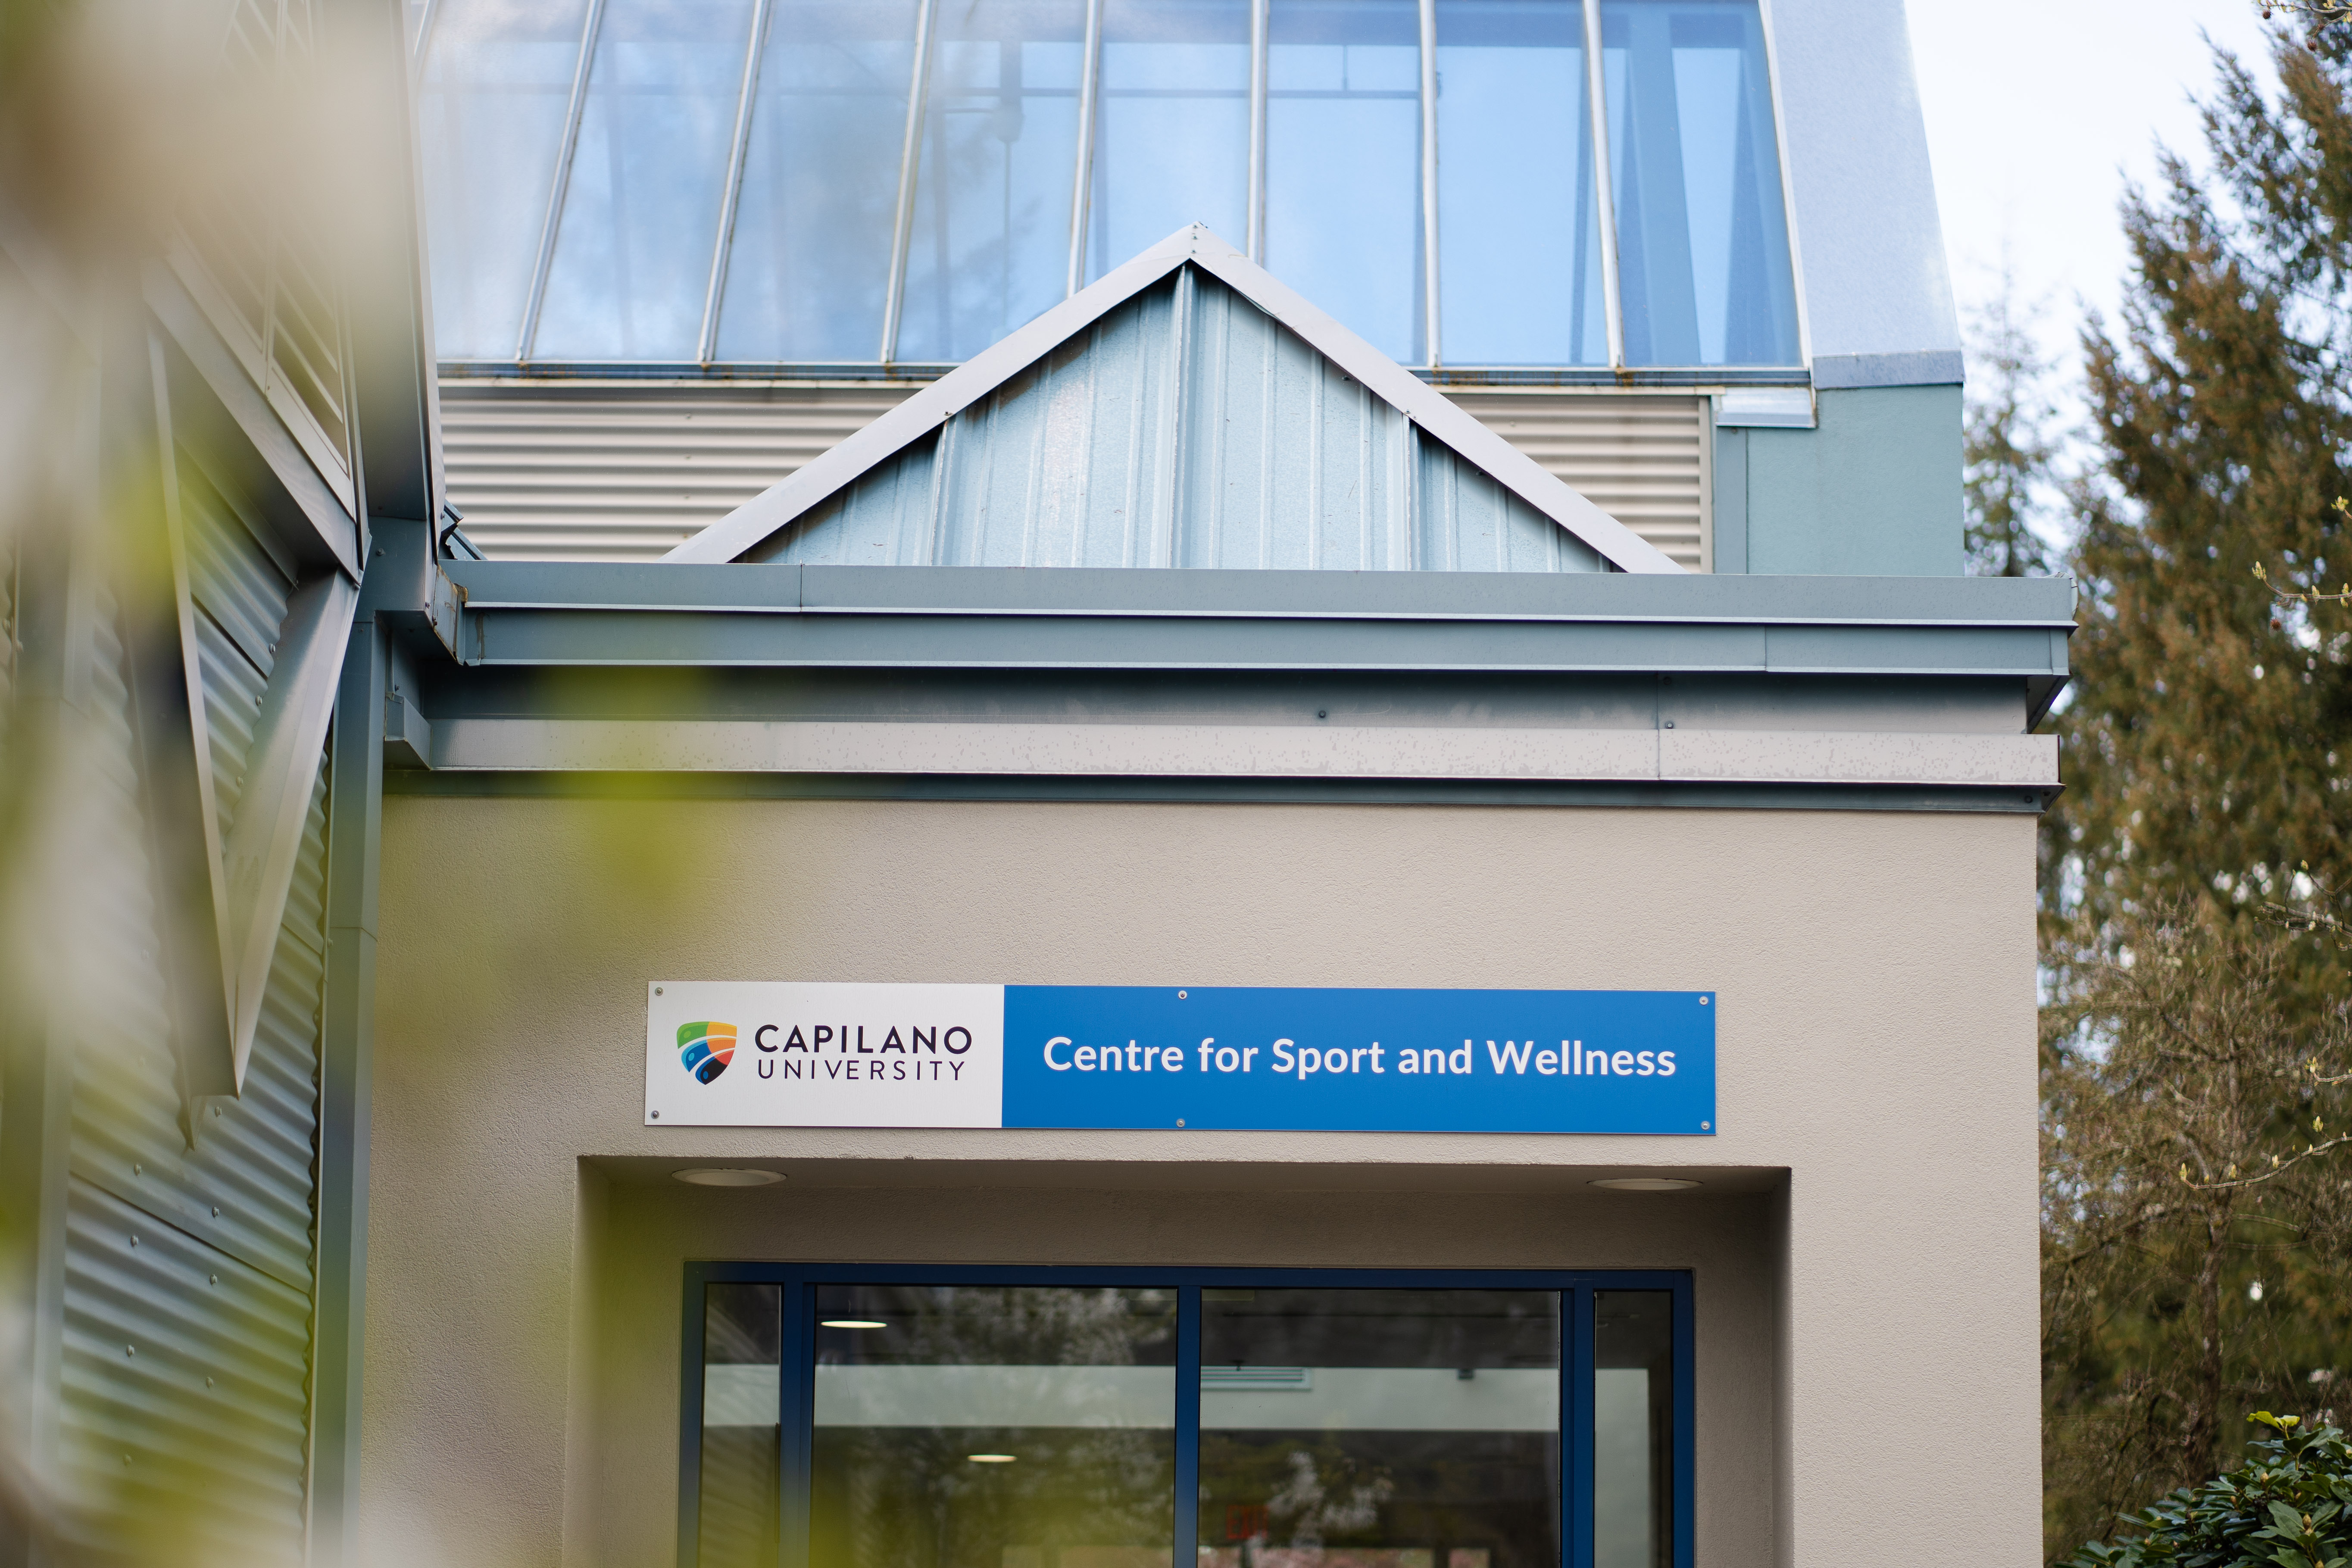 The centre for sport and wellness building